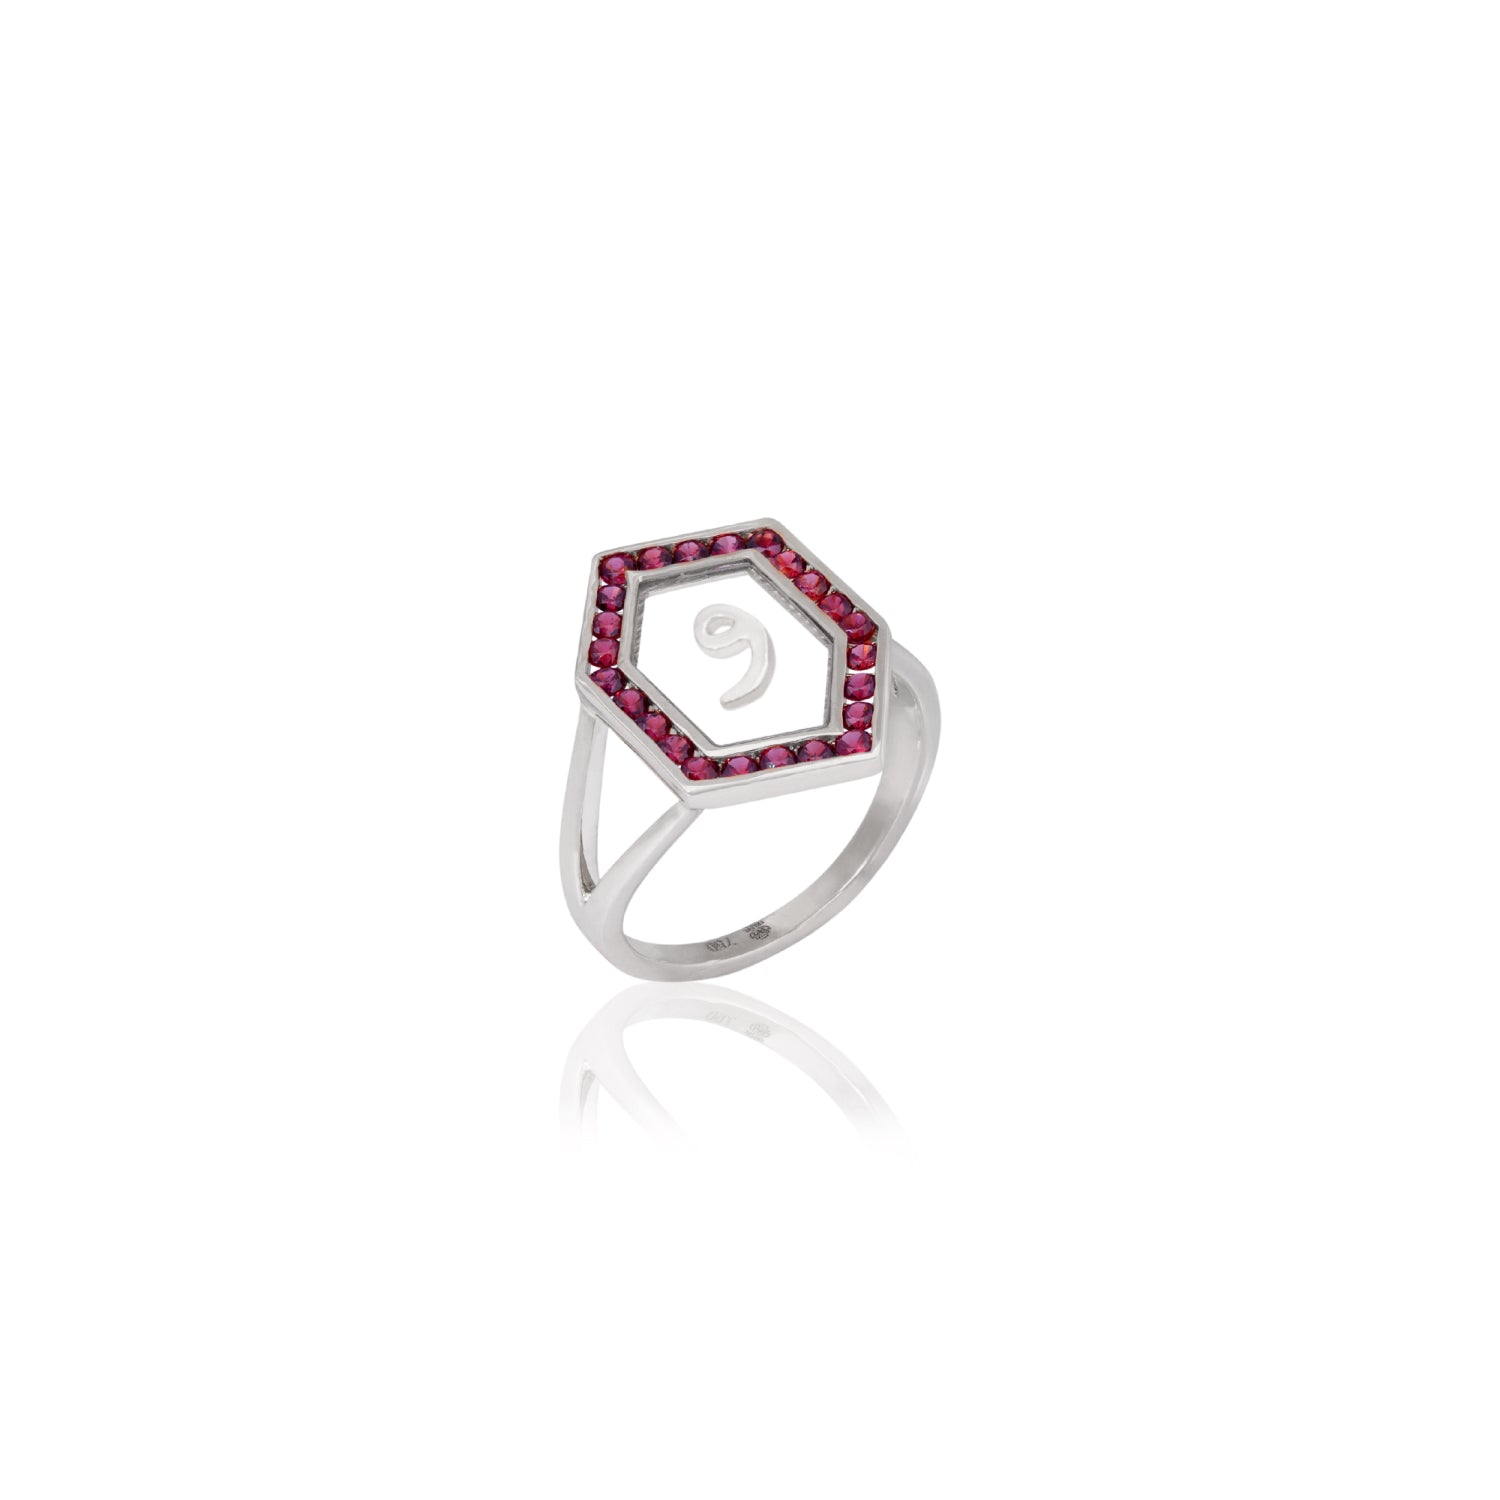 Qamoos 1.0 Letter و Ruby Ring in White Gold